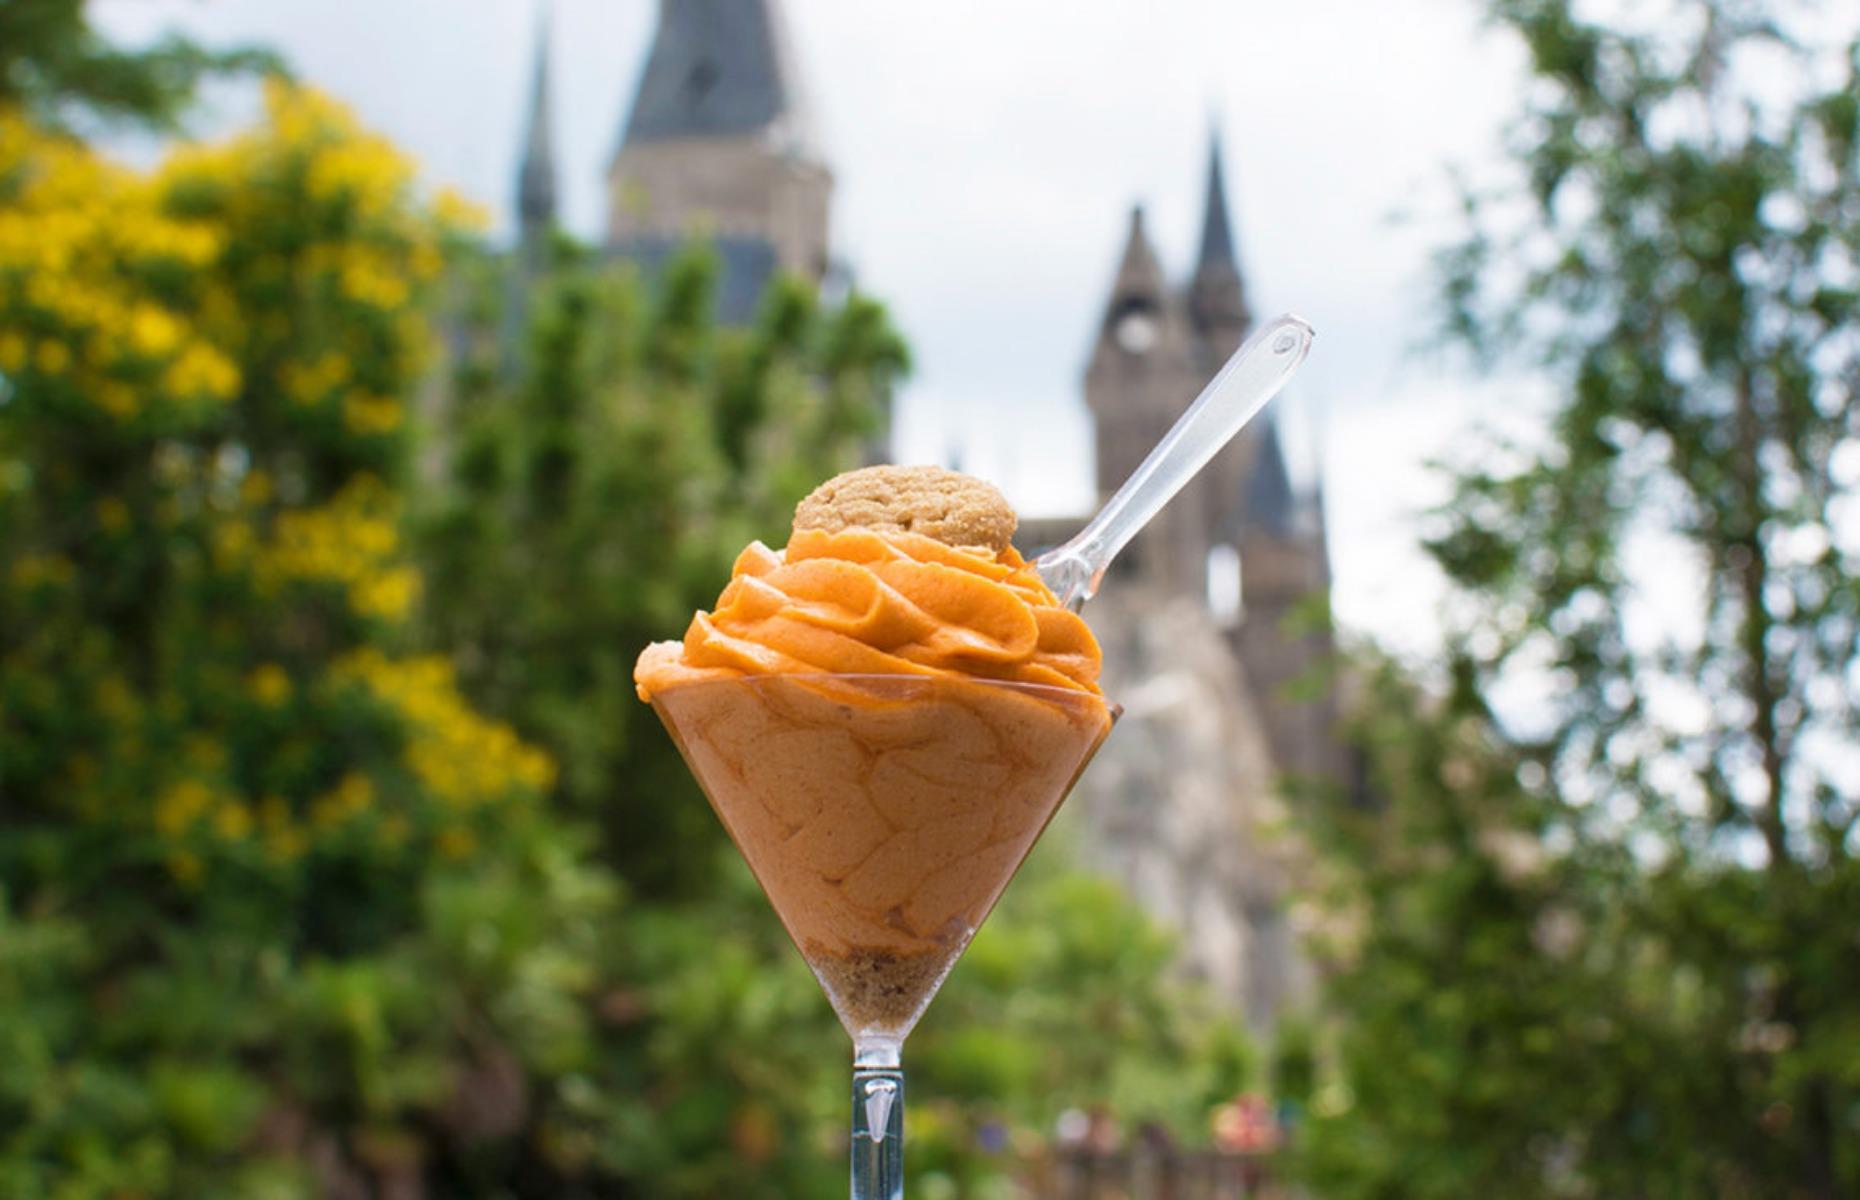 <p>Universal Studios’ pumpkin-flavoured No-Melt ice cream is made from swirls of thick, sunset orange icing and comes topped with a ginger snap cookie. As the name suggests (and Potterheads will attest), this 'ice cream' won't melt, making it just the thing to enjoy in the sunshine while strolling through Diagon Alley. You can find it at Honeydukes, the legendary sweet shop in Hogsmeade at Universal Studios. </p>